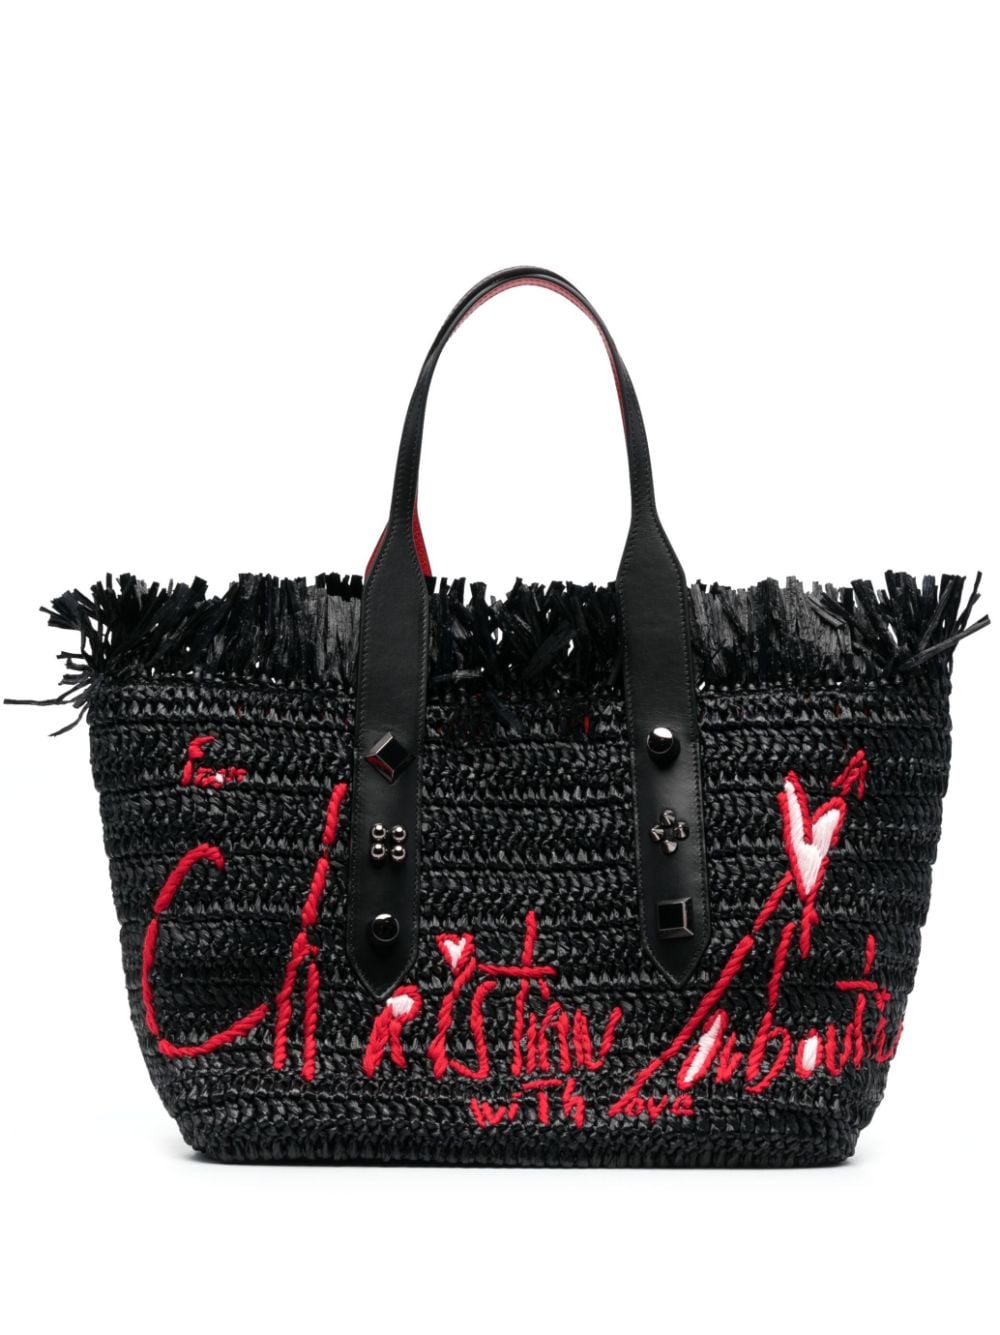 Black Raffia Tote Bag with Frayed Detail and Silver Studs by Christian Louboutin